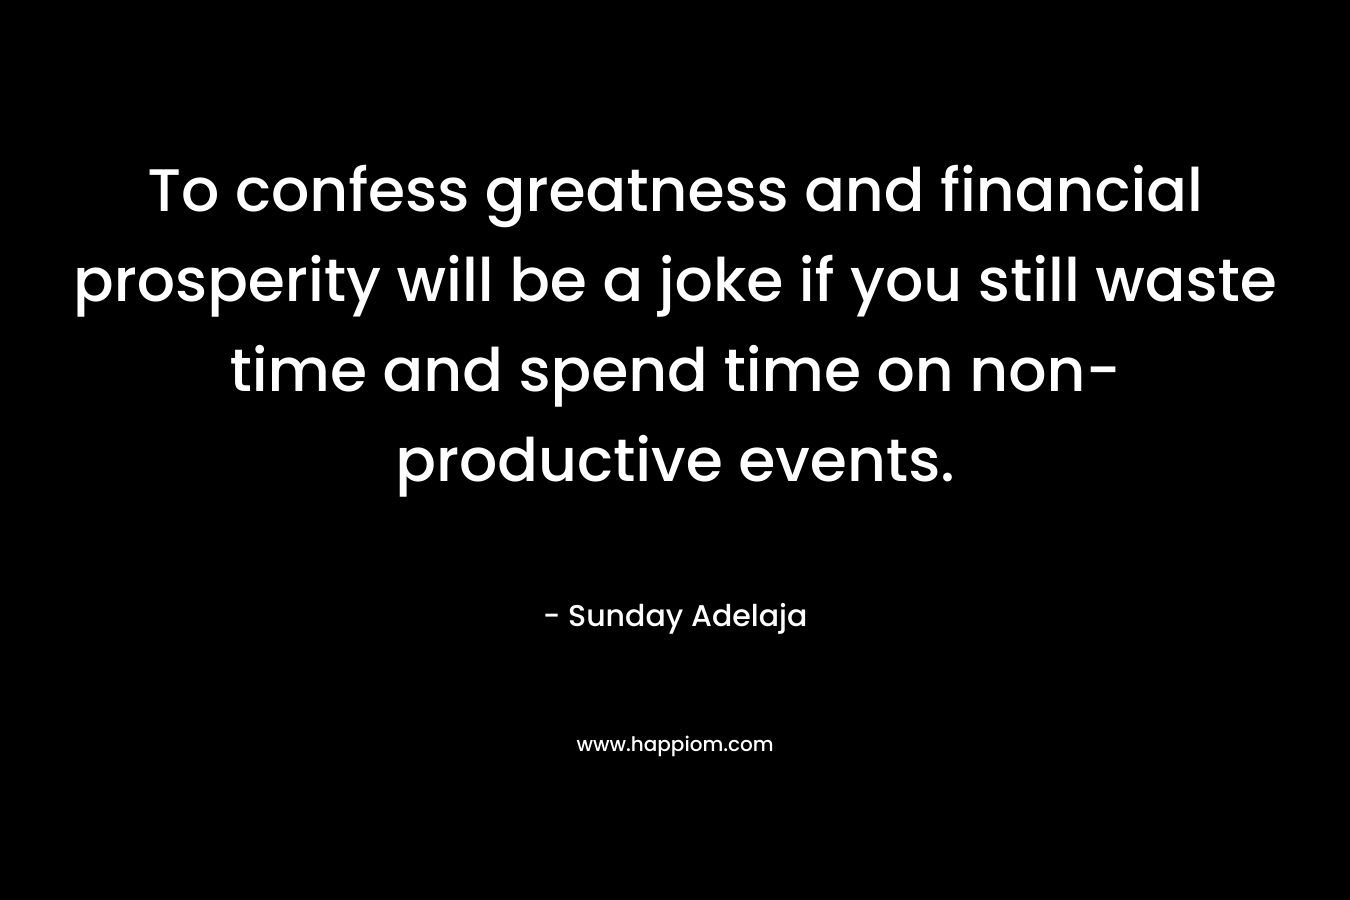 To confess greatness and financial prosperity will be a joke if you still waste time and spend time on non-productive events.